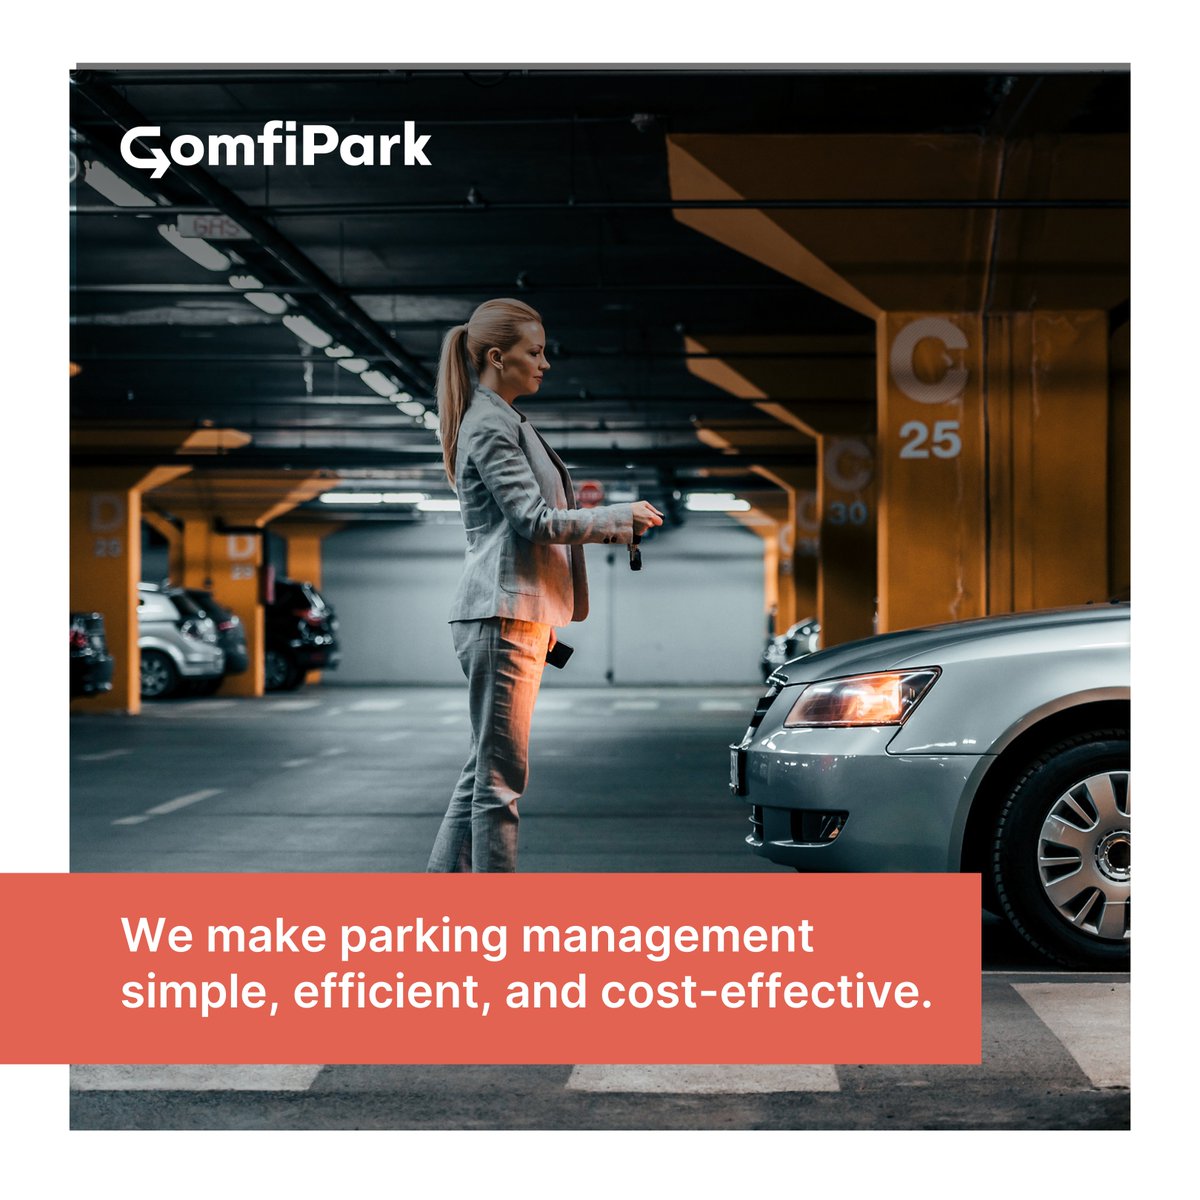 No more wasting time and money on inefficient parking management! ComfiPark streamlines the process by optimizing resources, lowering costs, and reducing congestion. 

#EfficientParking #CostSavings #ParkingManagement